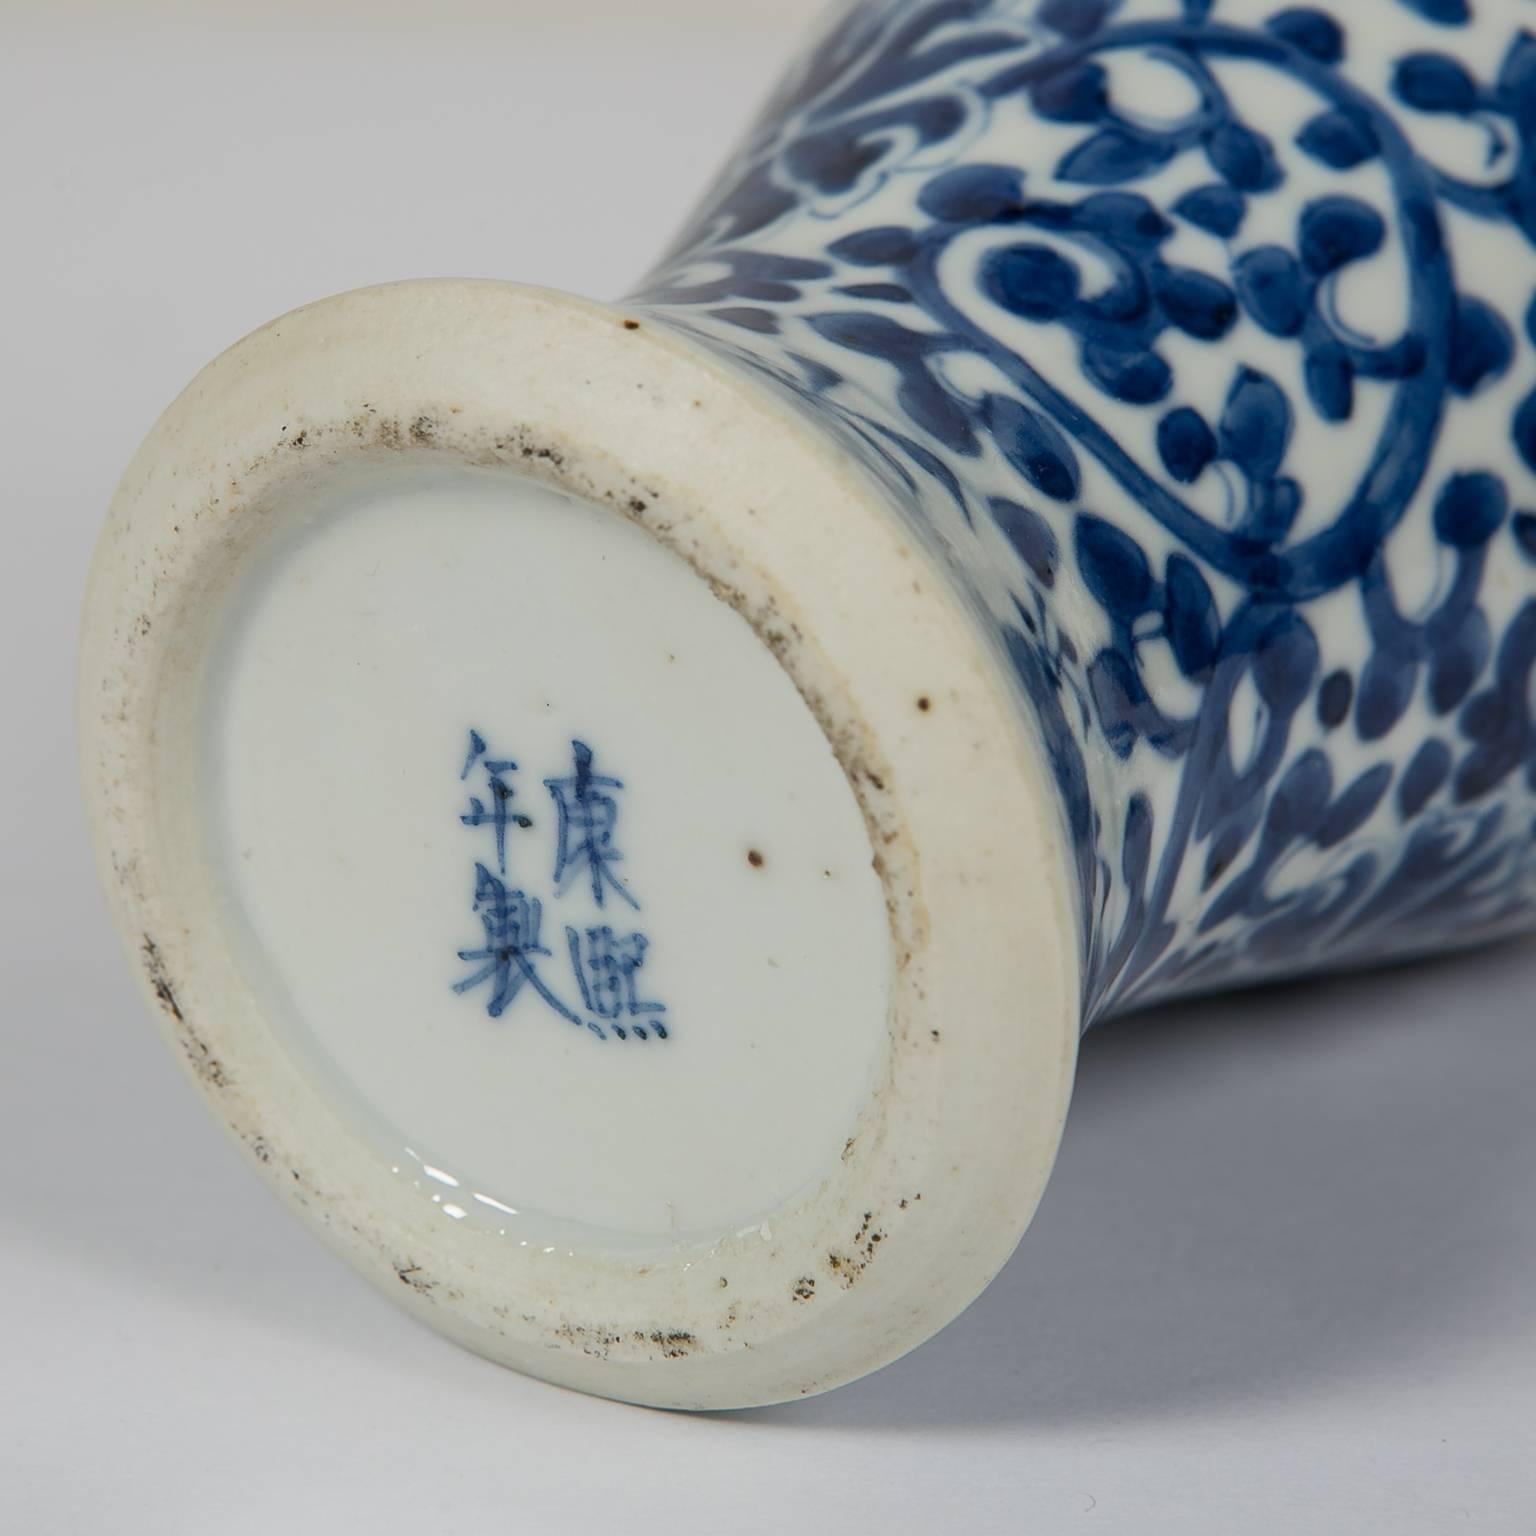 Hand-Painted Blue and White Chinese Porcelain Vases, Pair